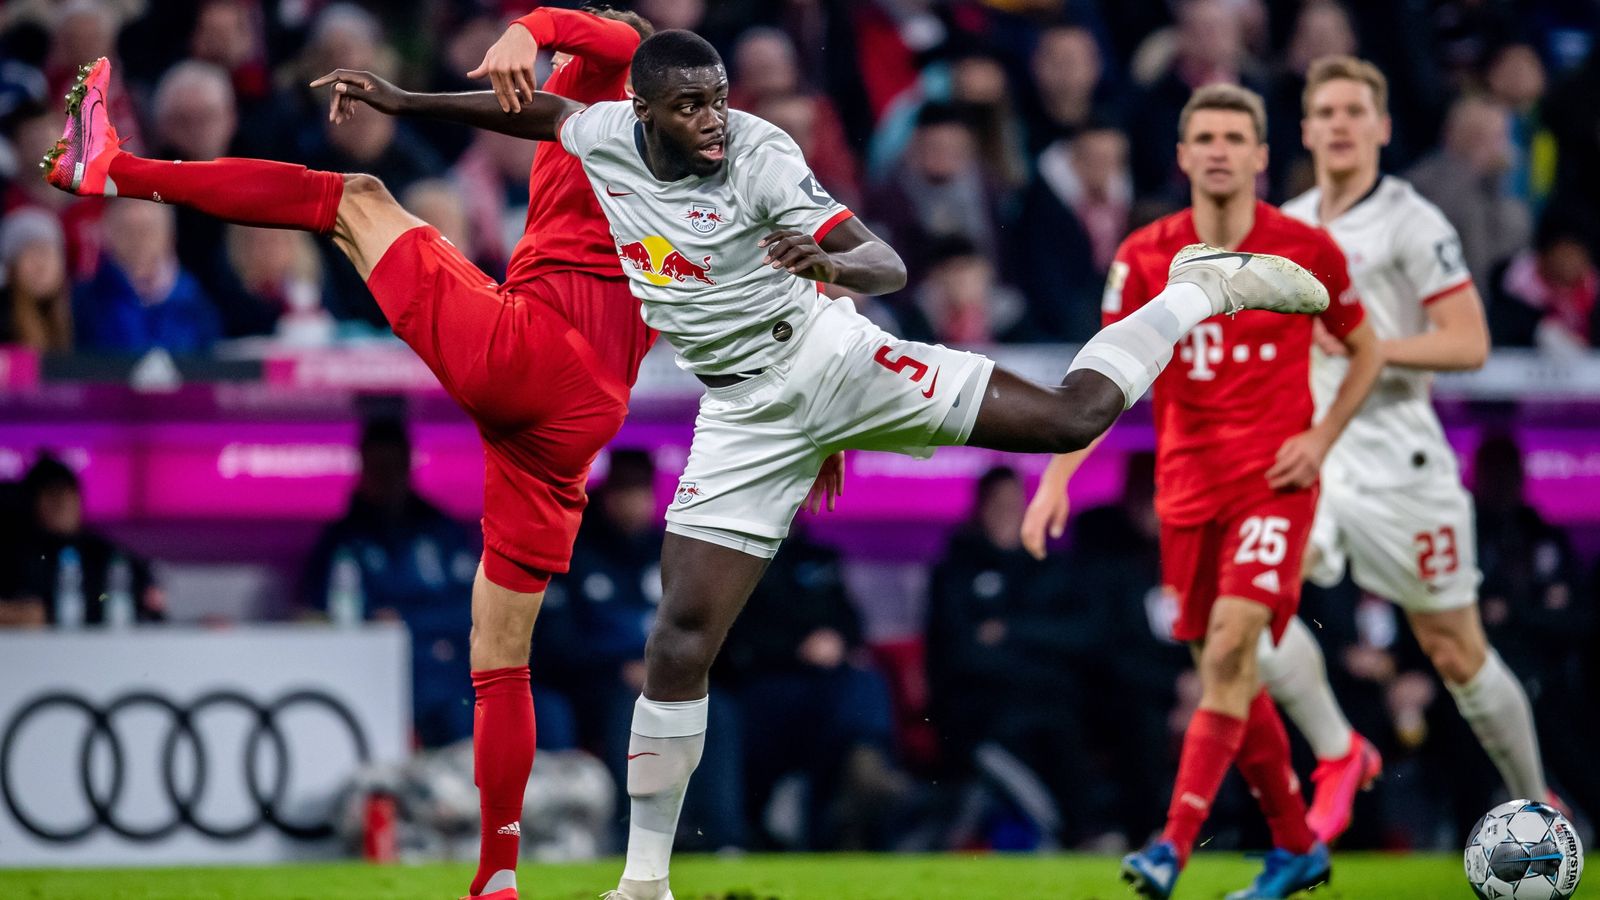 Upamecano Chooses to Stay at RB Leipzig Rather than Go to FC Bayern